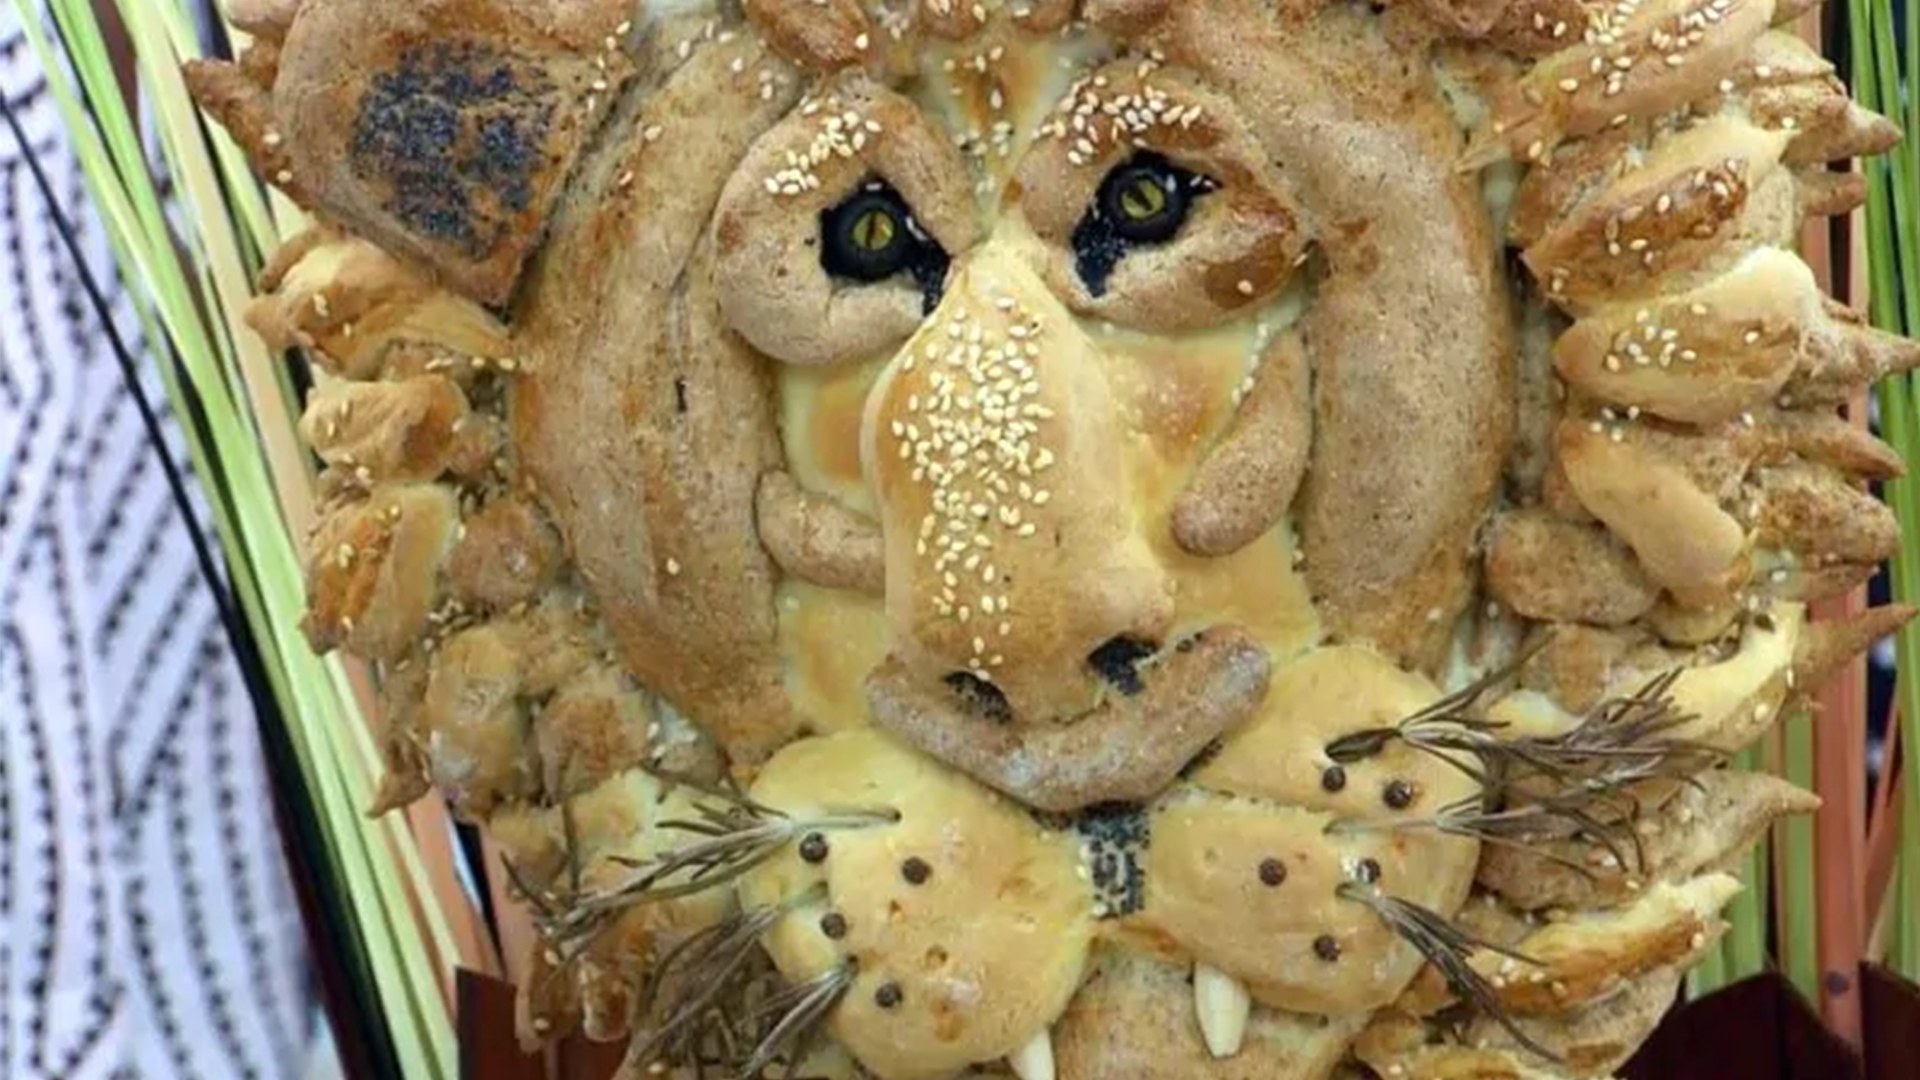 An intricate bread creation which looks like a lion